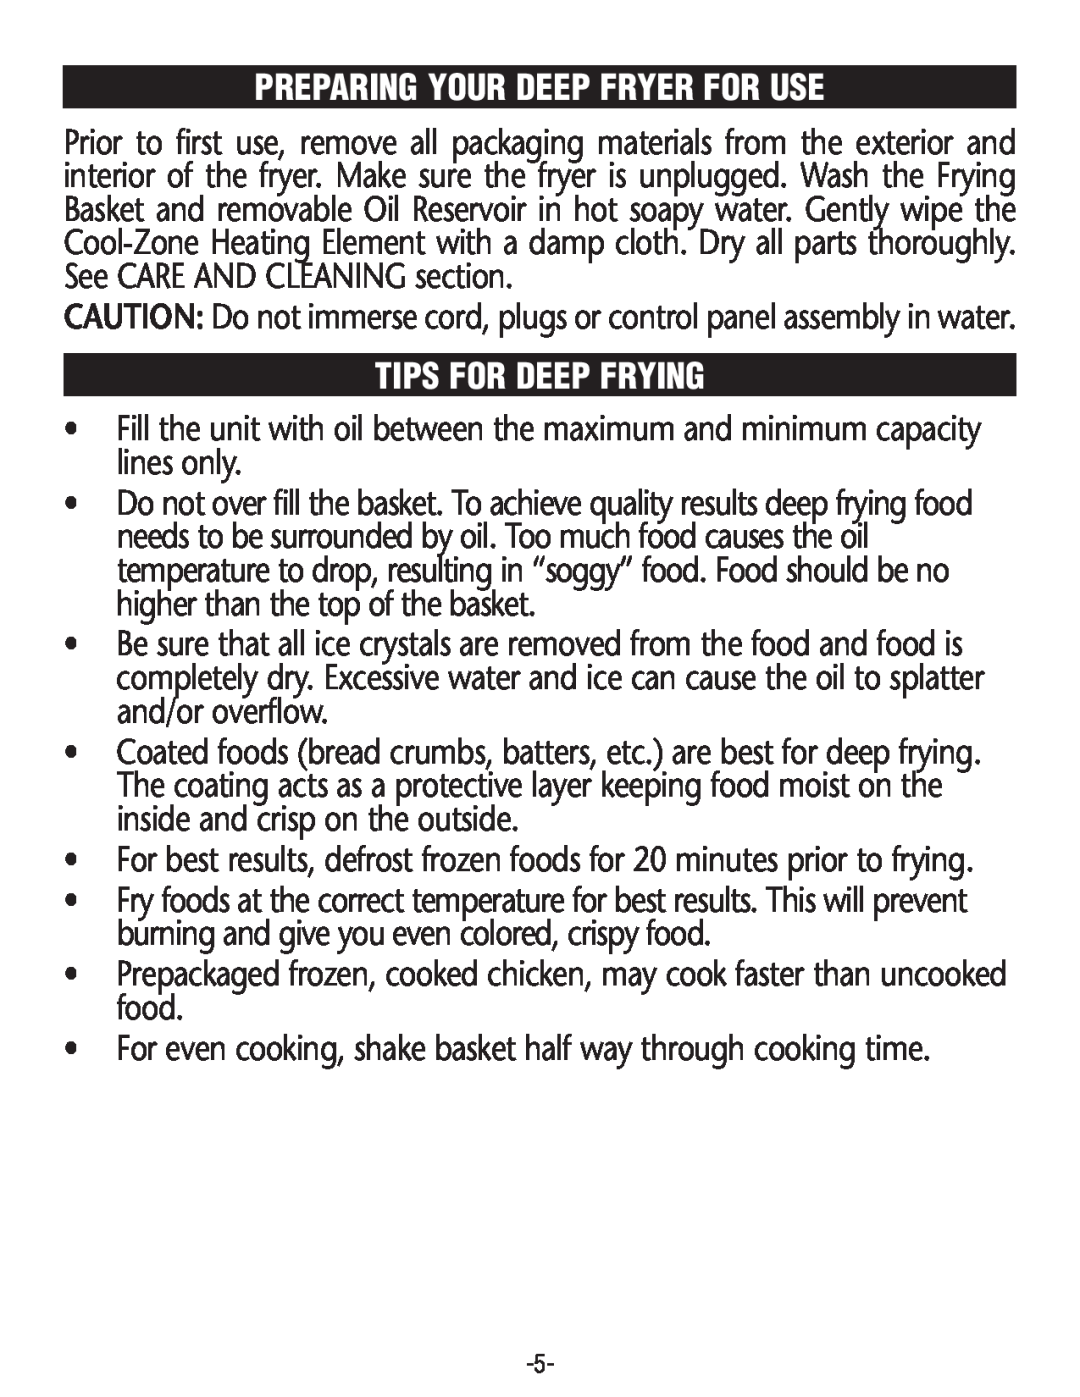 Rival CZF530 manual Preparing Your Deep Fryer For Use, Tips For Deep Frying 